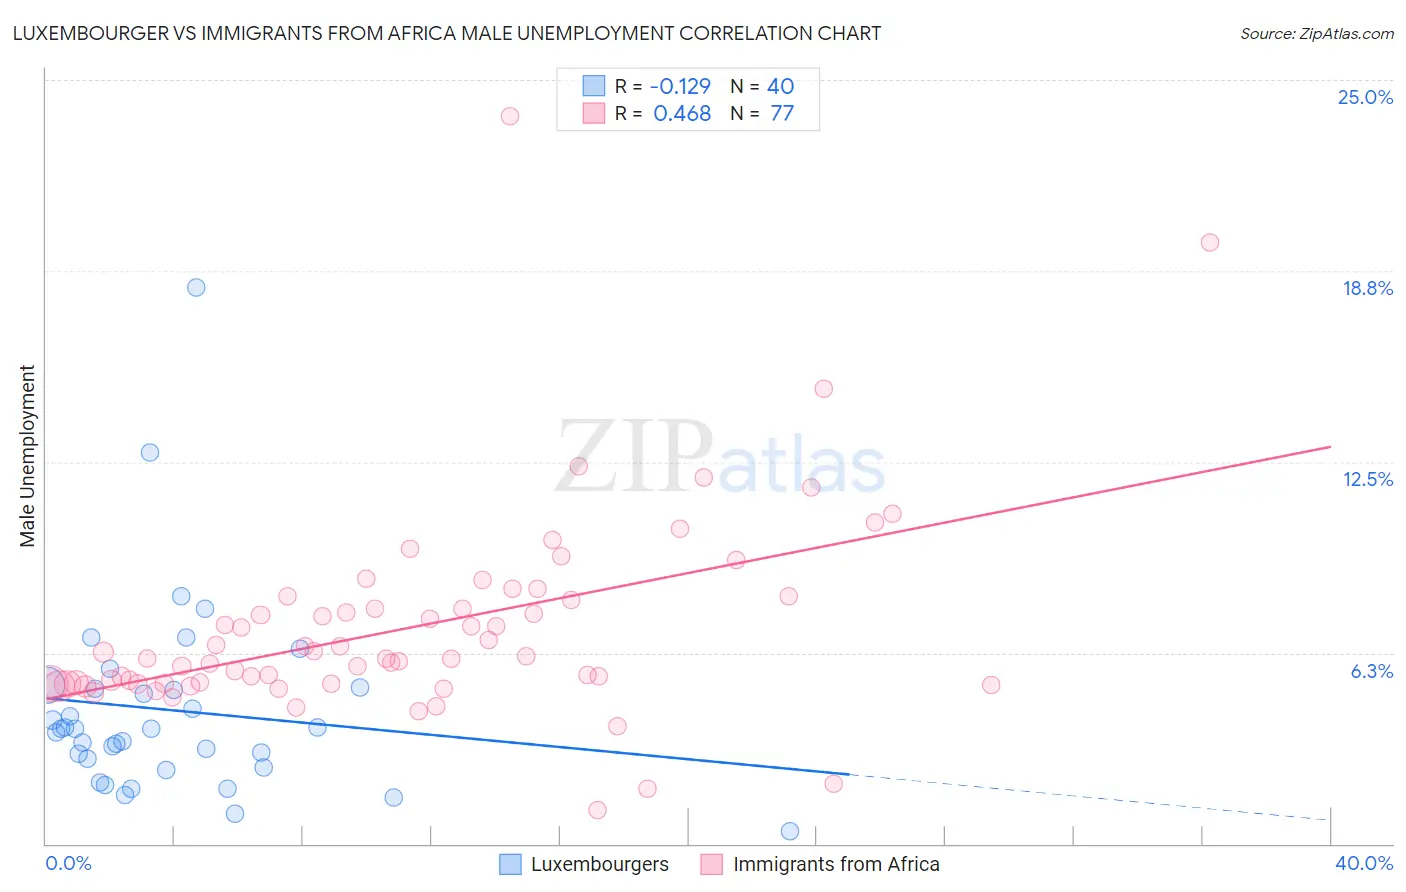 Luxembourger vs Immigrants from Africa Male Unemployment